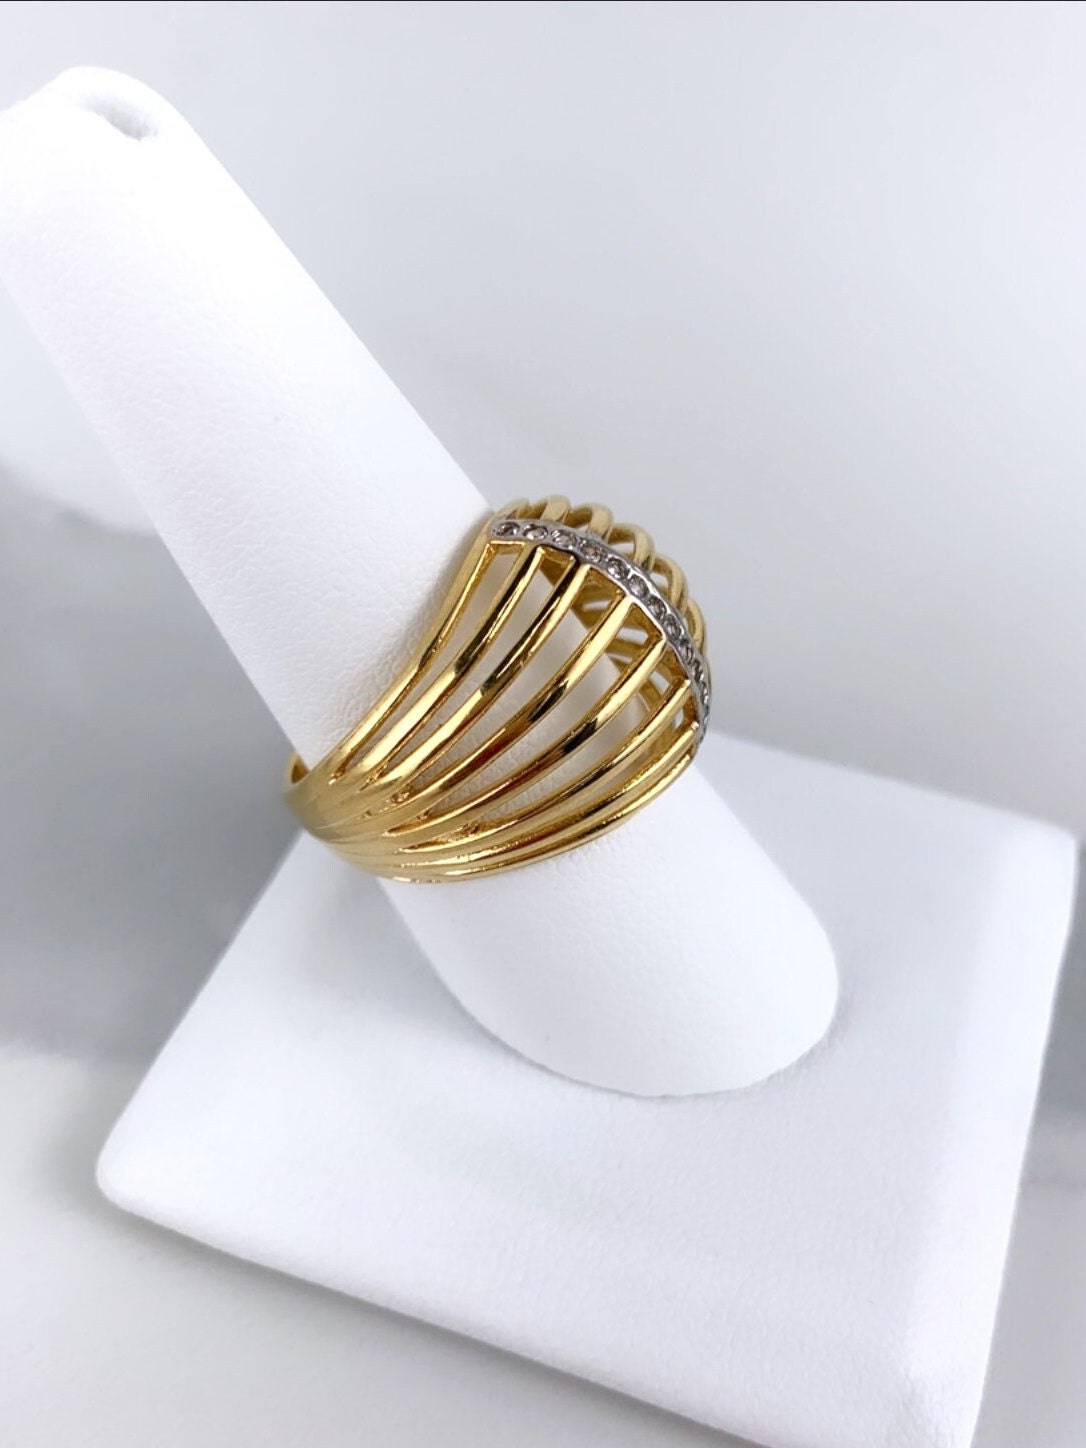 18k Gold Filled Hollow Dome Ring Featuring Cubic Zirconia Detail Availiable Gold or Silver Wholesale Jewelry Supplies